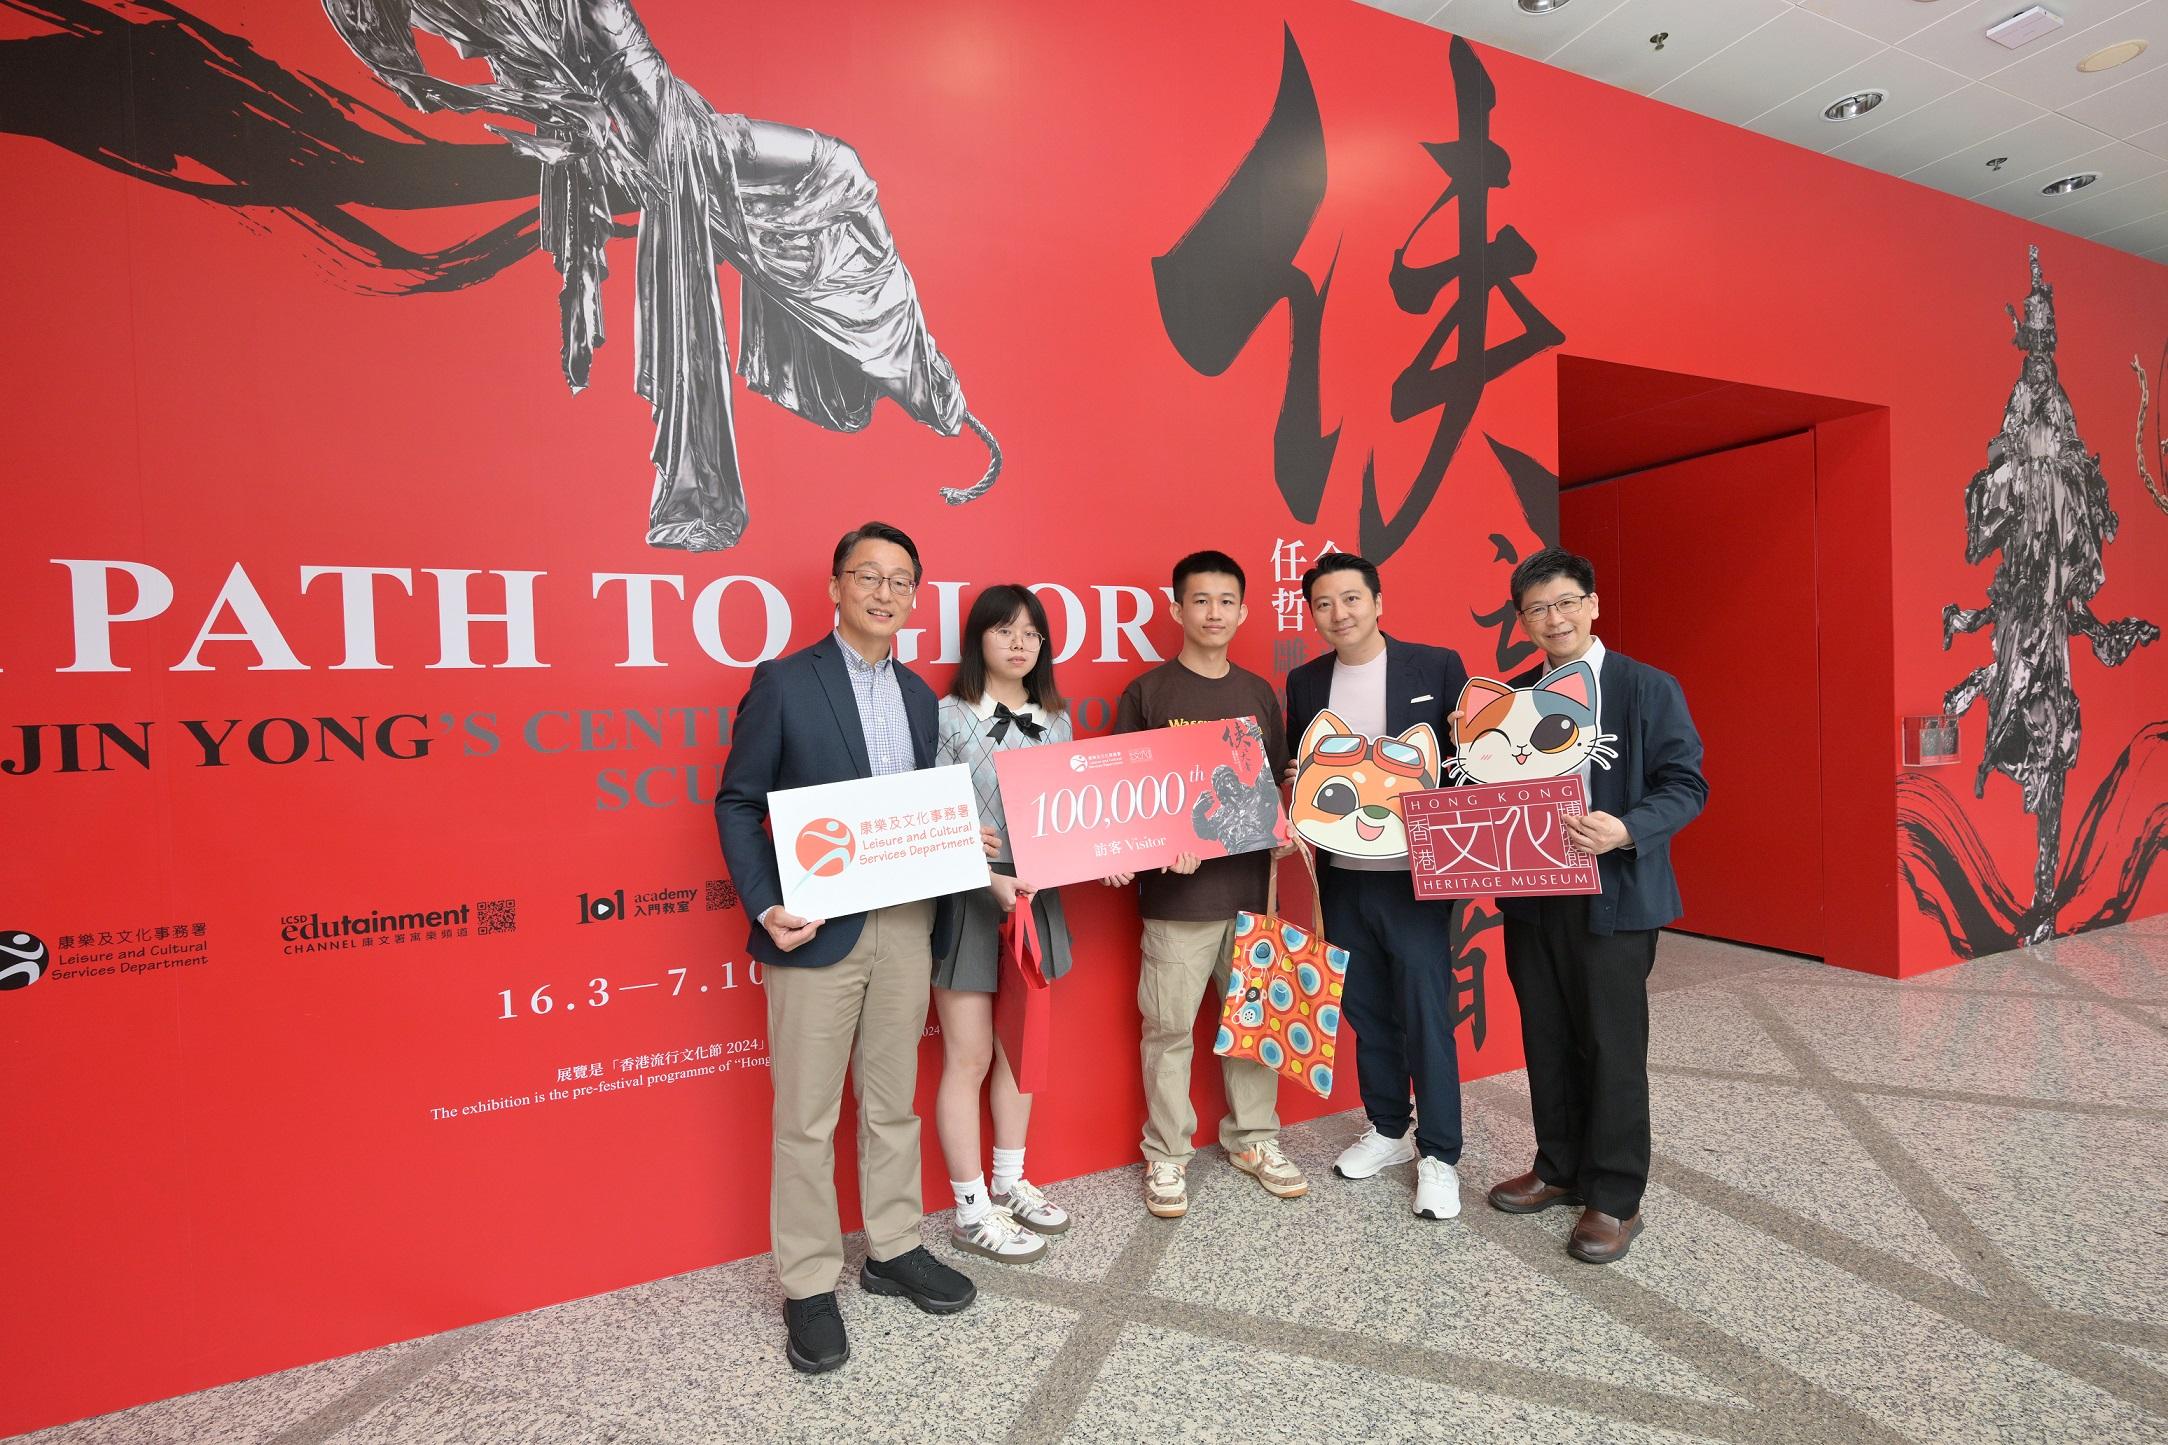 The "A Path to Glory - Jin Yong's Centennial Memorial, Sculpted by Ren Zhe" exhibition at the Hong Kong Heritage Museum (HKHM) has reached 100 000 visitors since its opening on March 16. Photo shows the Director of Leisure and Cultural Services, Mr Vincent Liu (first left), the co-curator Mr William Fong (second right), and the Acting Museum Director of the HKHM, Dr Raymond Tang (first right), welcoming the 100 000th visitor of the exhibition and presenting a gift pack to the visitors today (May 1).